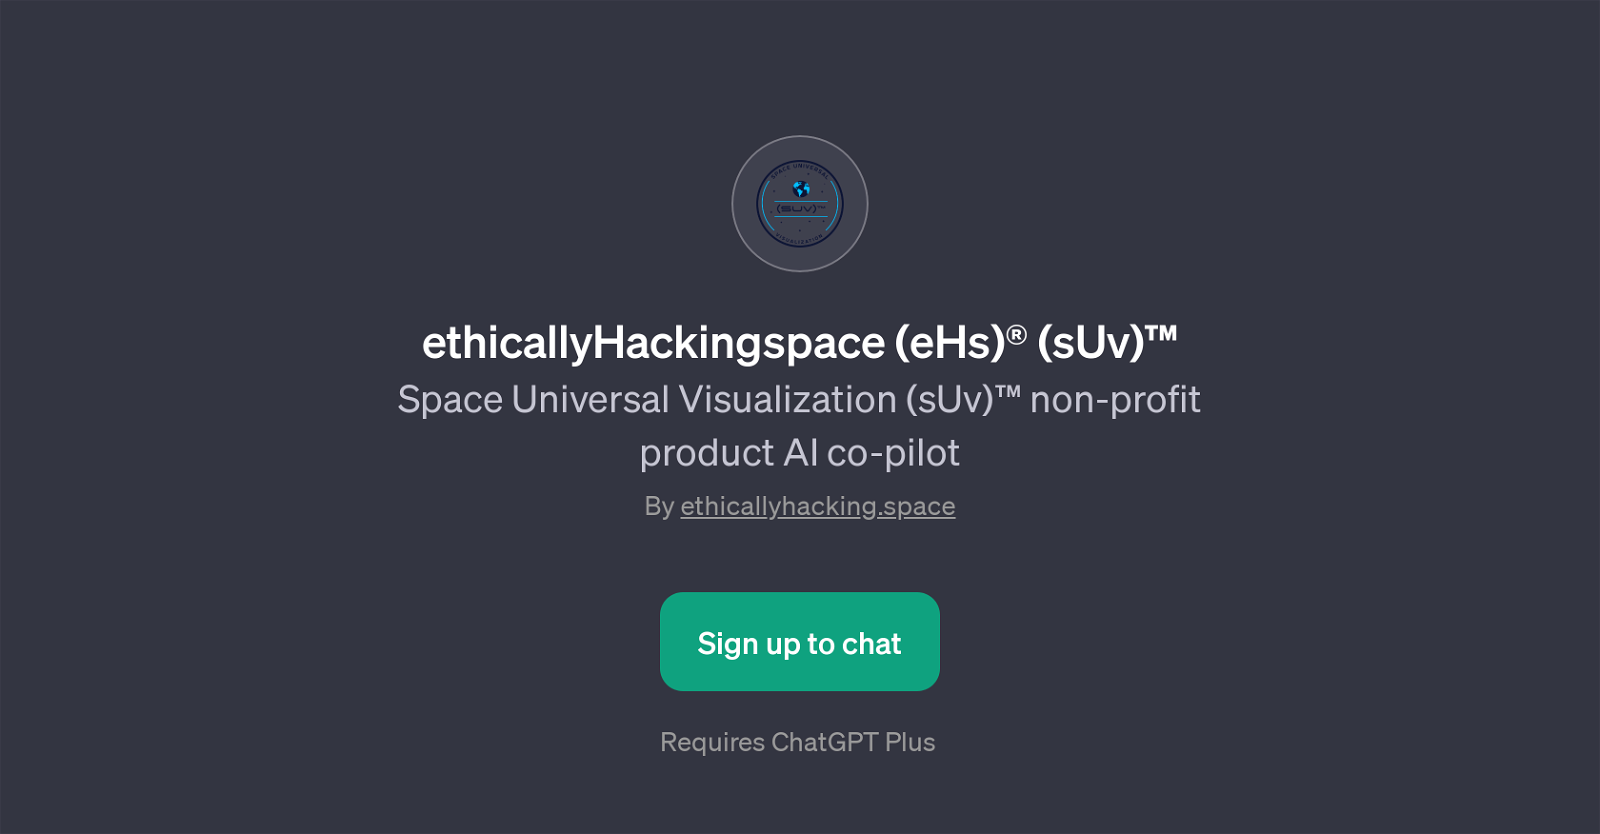 ethicallyHackingspace (eHs) (sUv) website